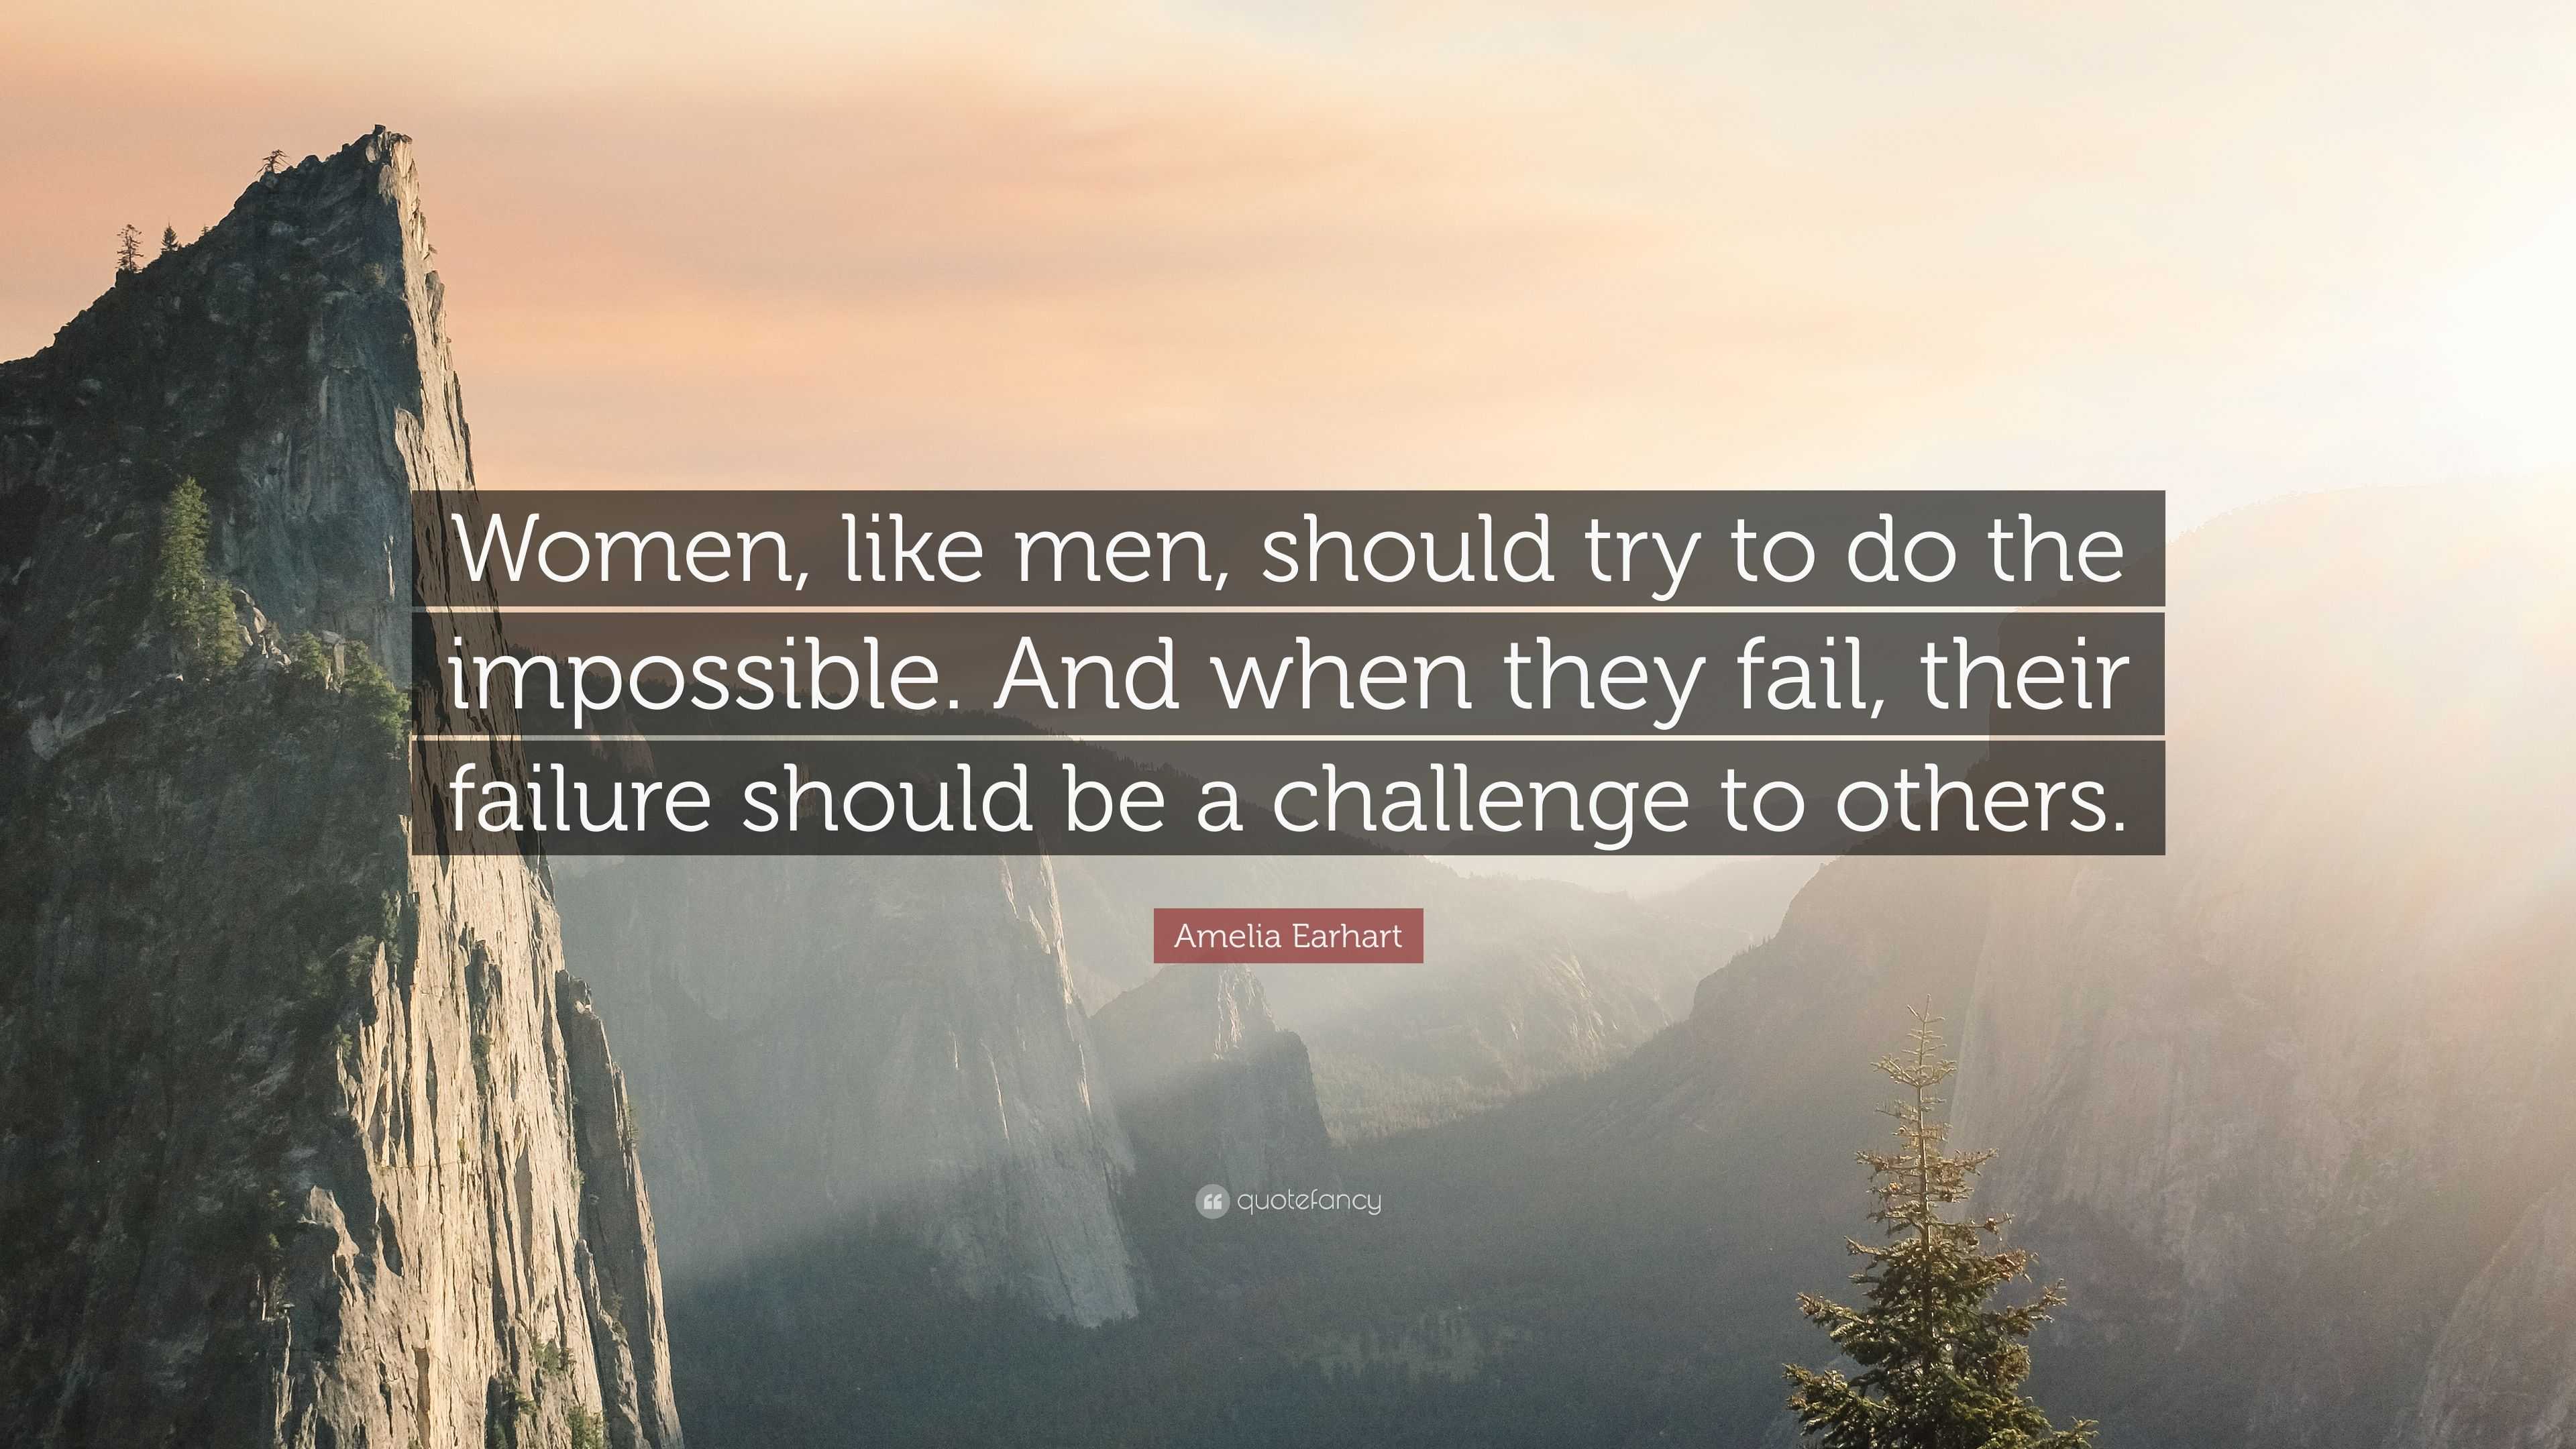 Amelia Earhart Quote: “Women, like men, should try to do the impossible